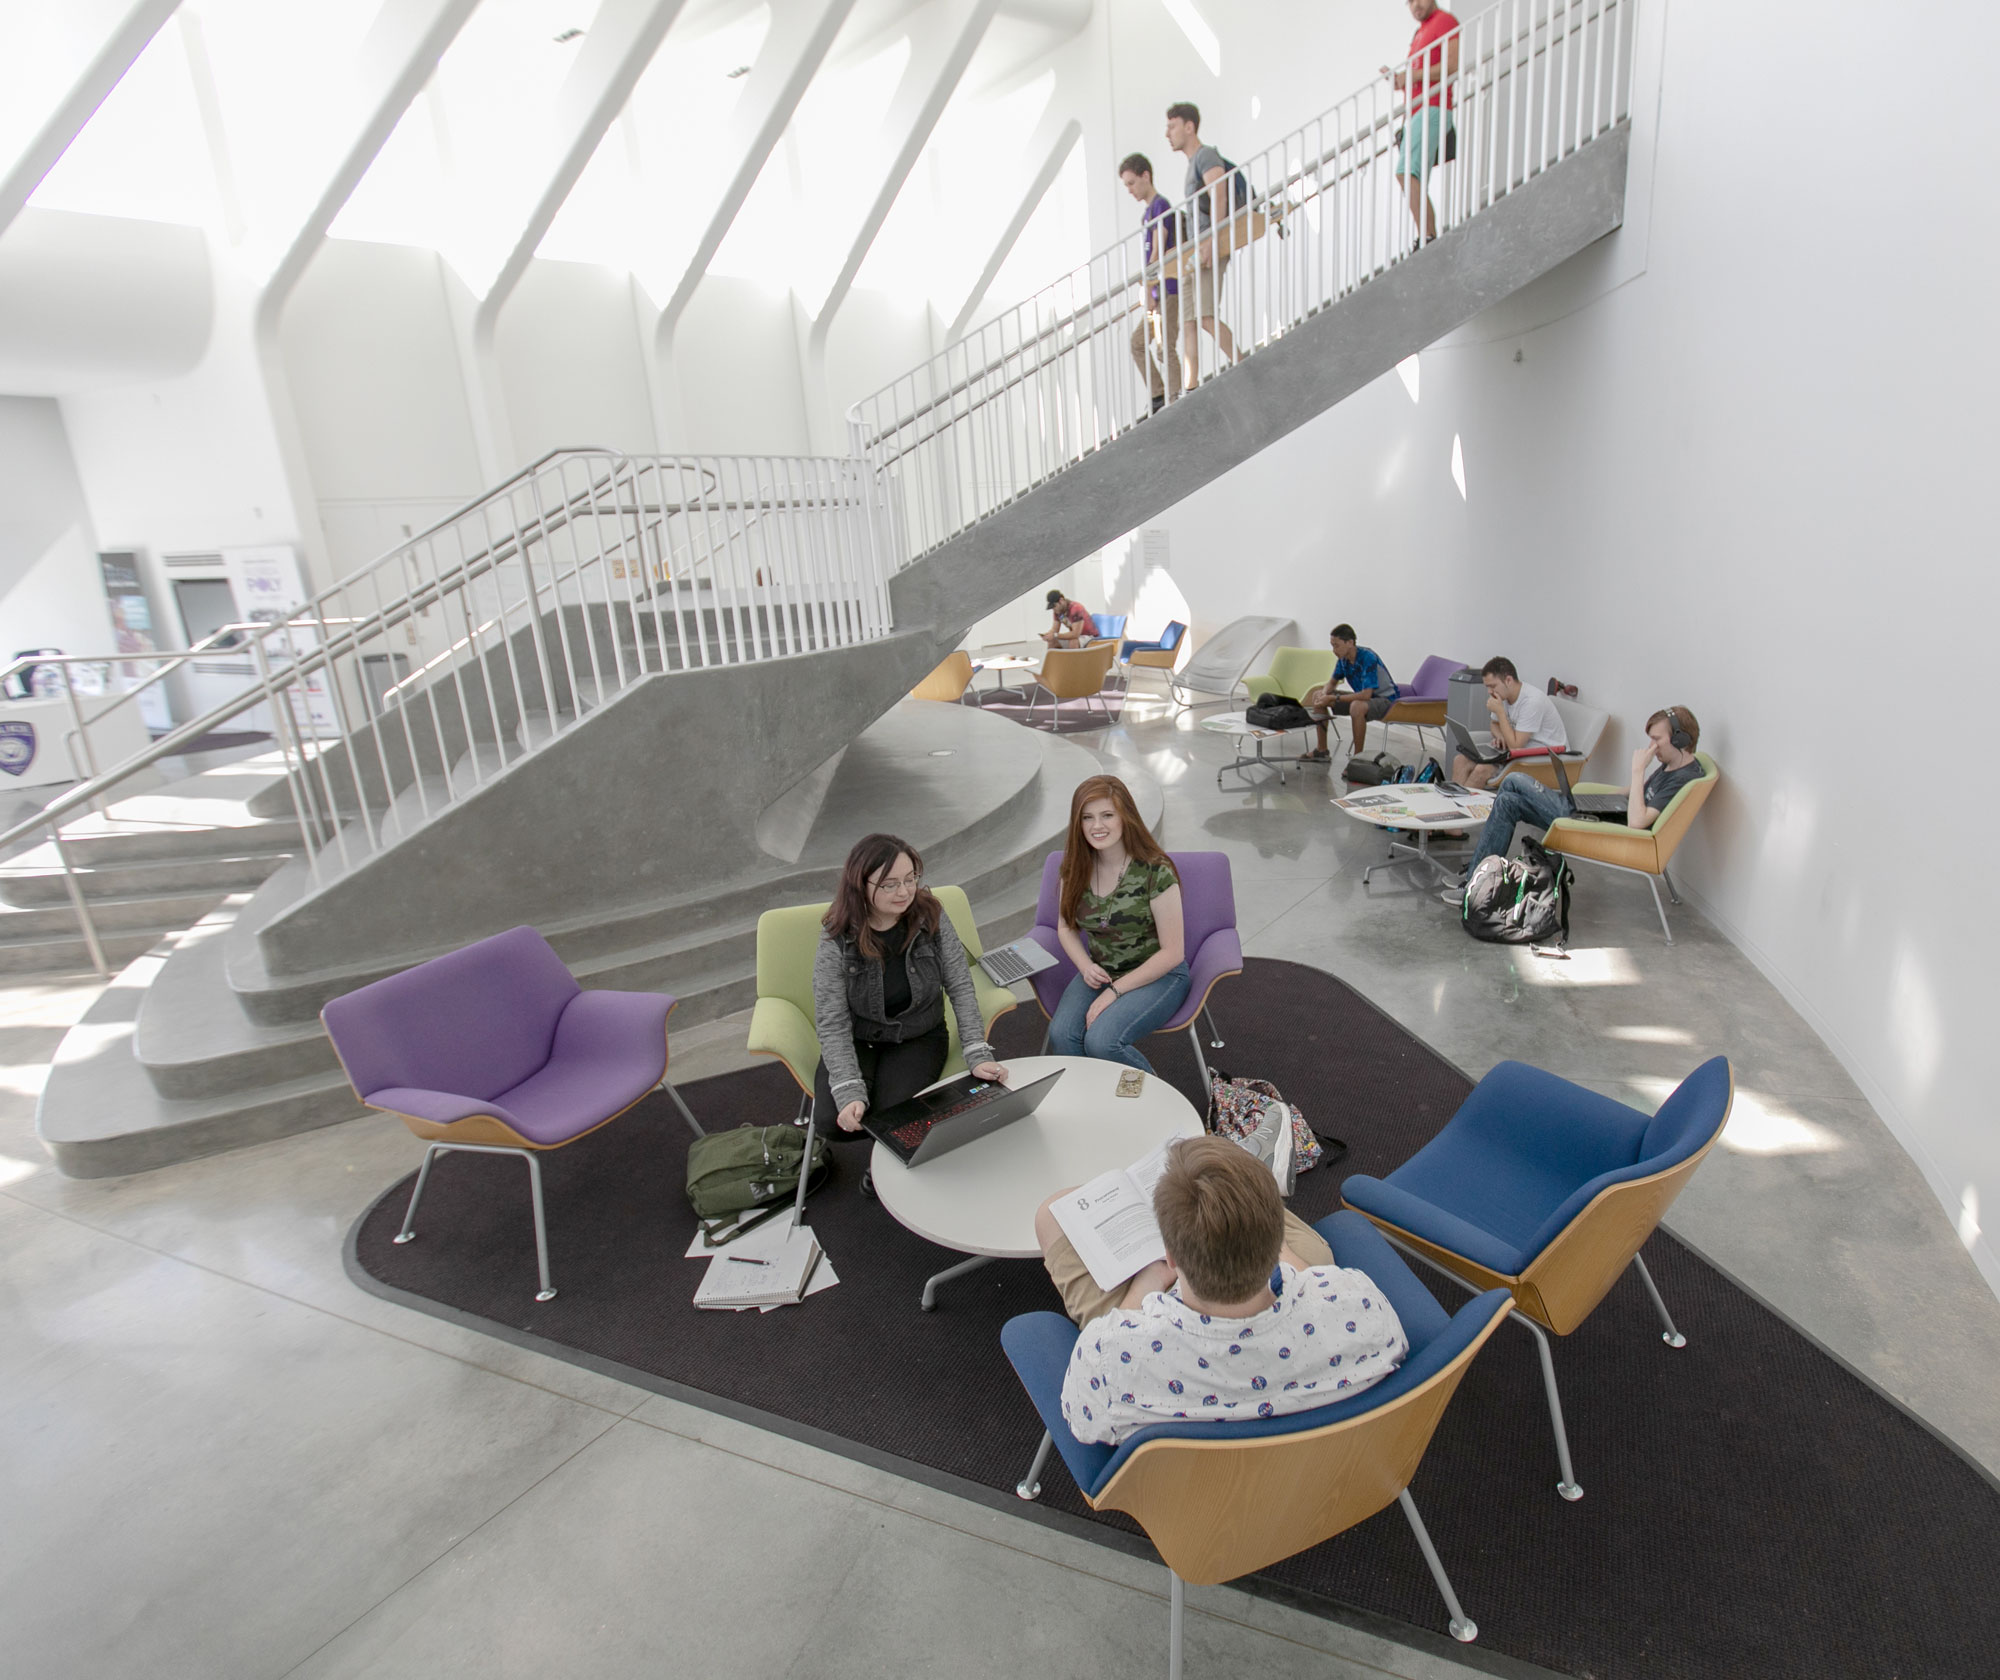 Students sitting in colorful chairs near descending staircase.